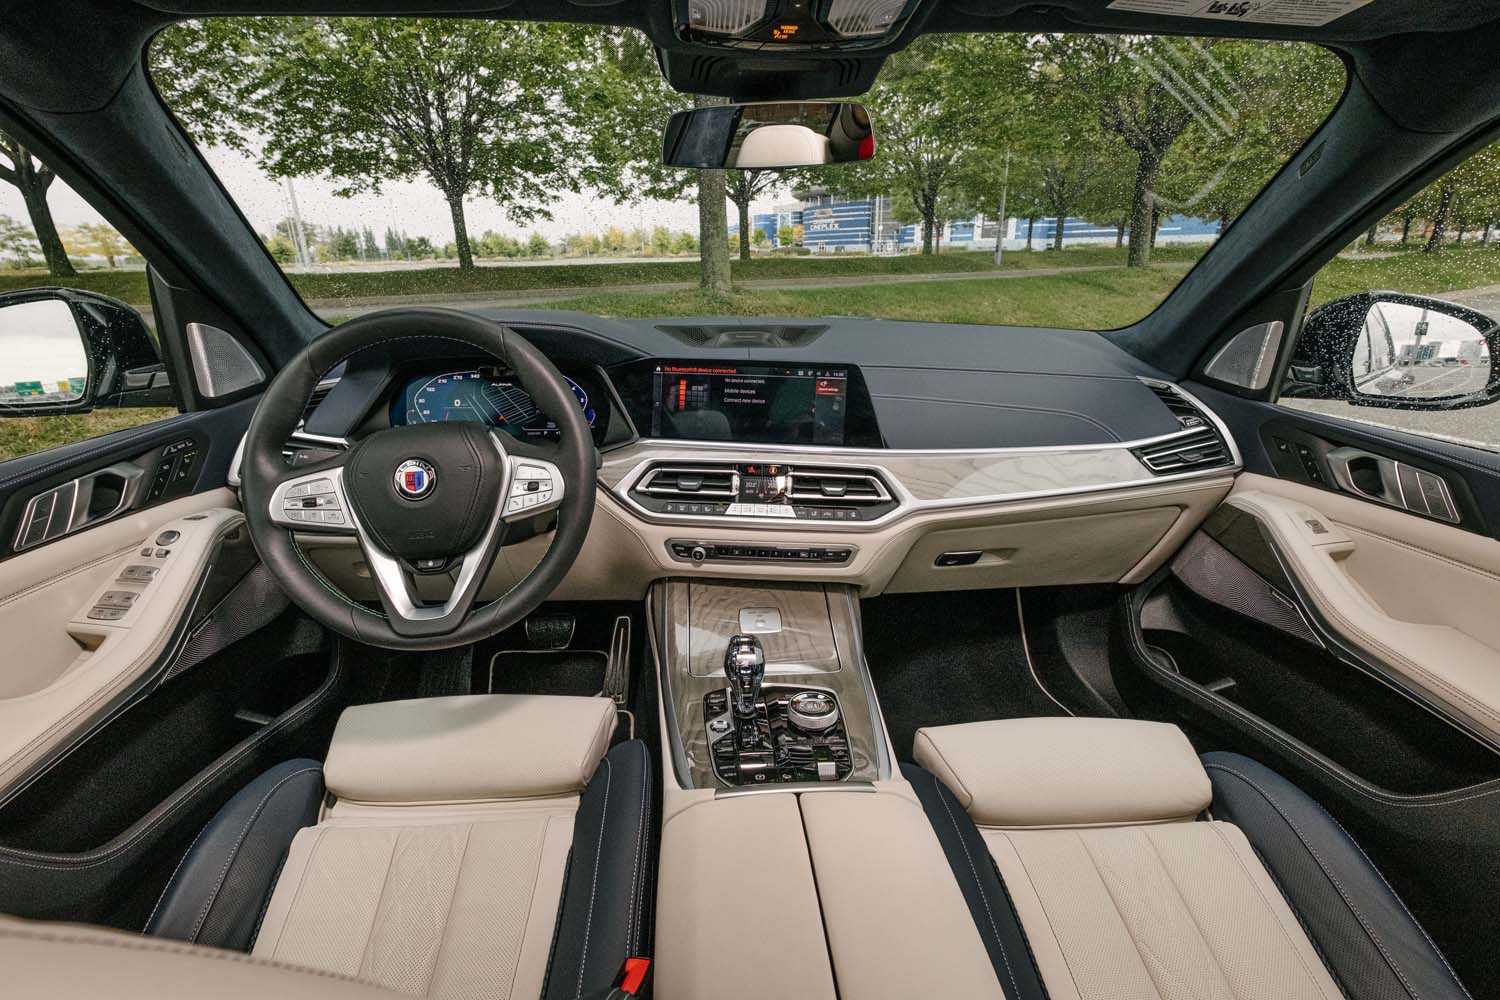 2022 BMW XB7 Alpina Review: Performance That Doesn't Compromise Comfort -  Motor Illustrated